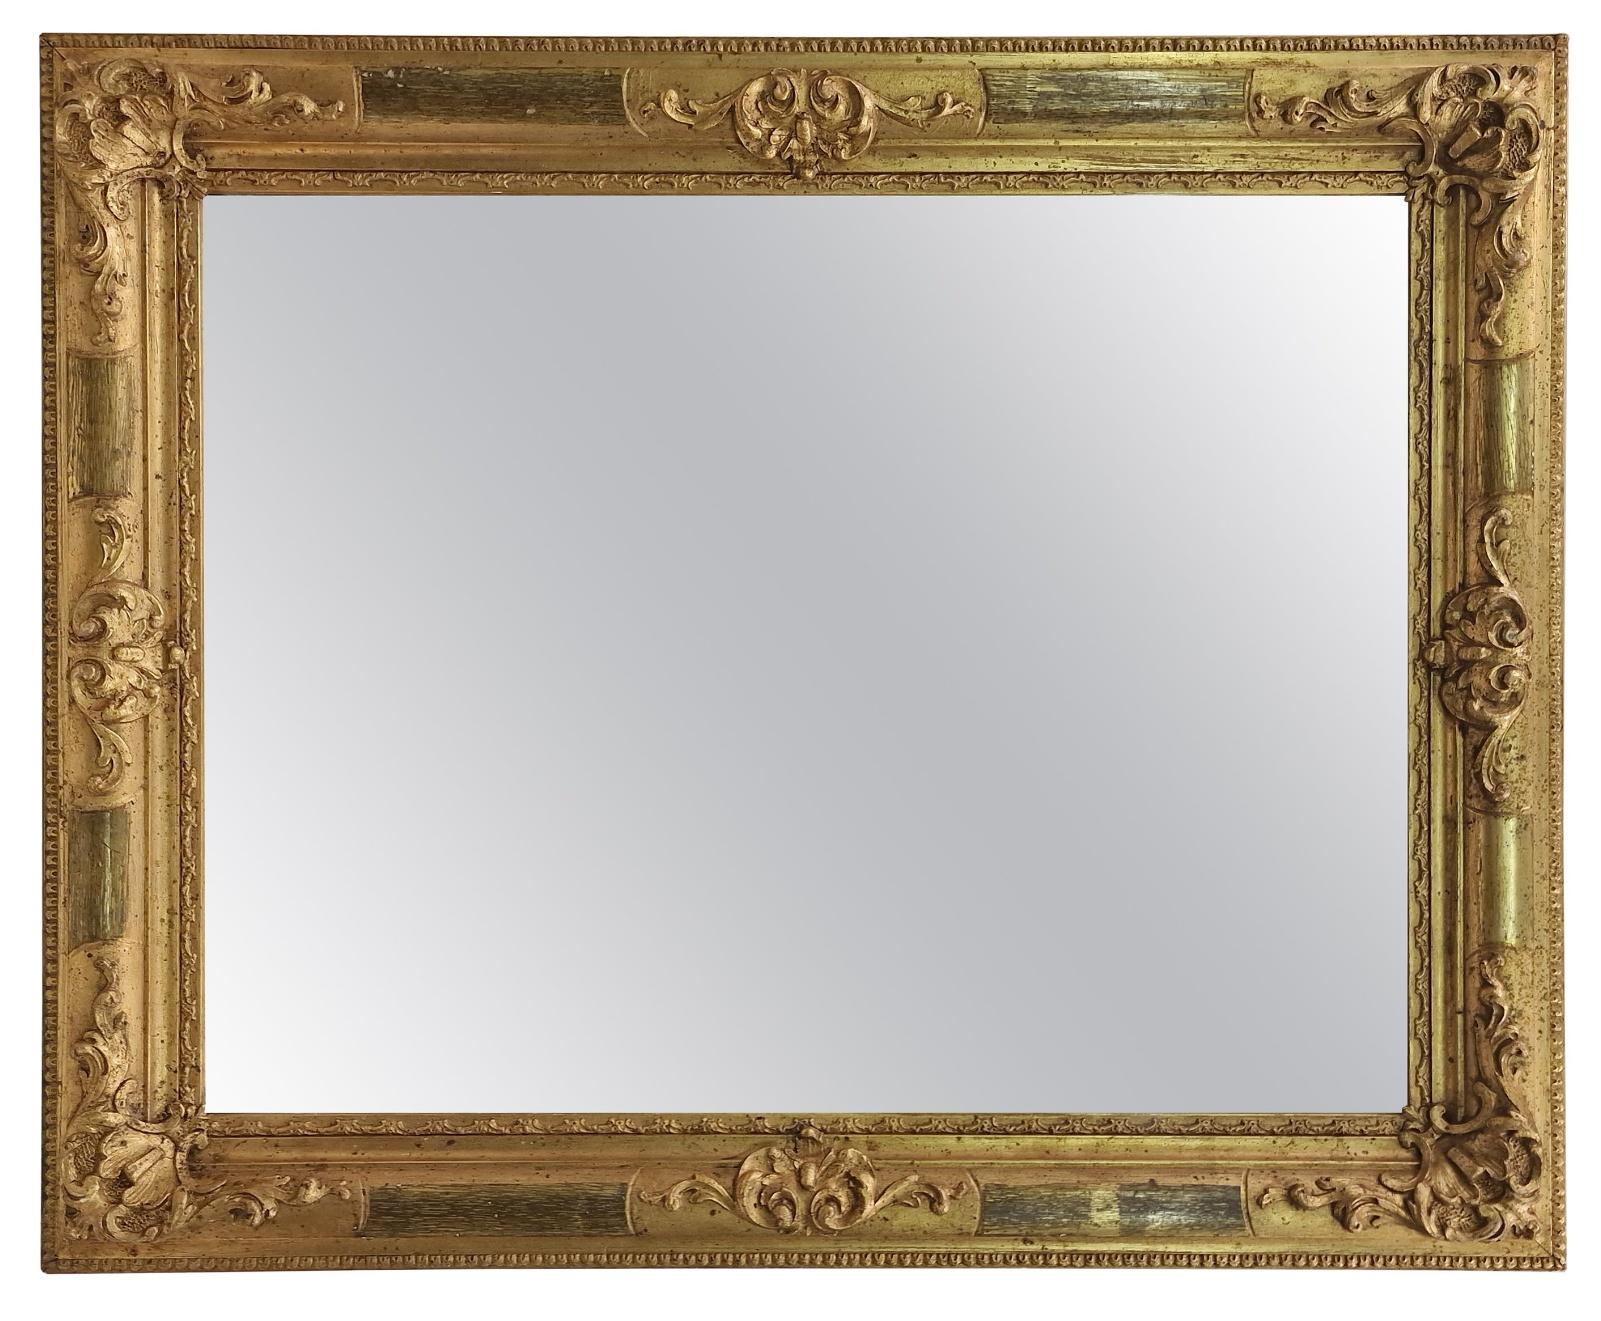 Wonderful wall mirror from the Biedermeier period, around 1850/60, made in Austria, Europe. 
The mirror is in impressive good condition, only the mirror plate has been renewed to enable it to be used. 
This gilt mirror, circa 170 years old, has